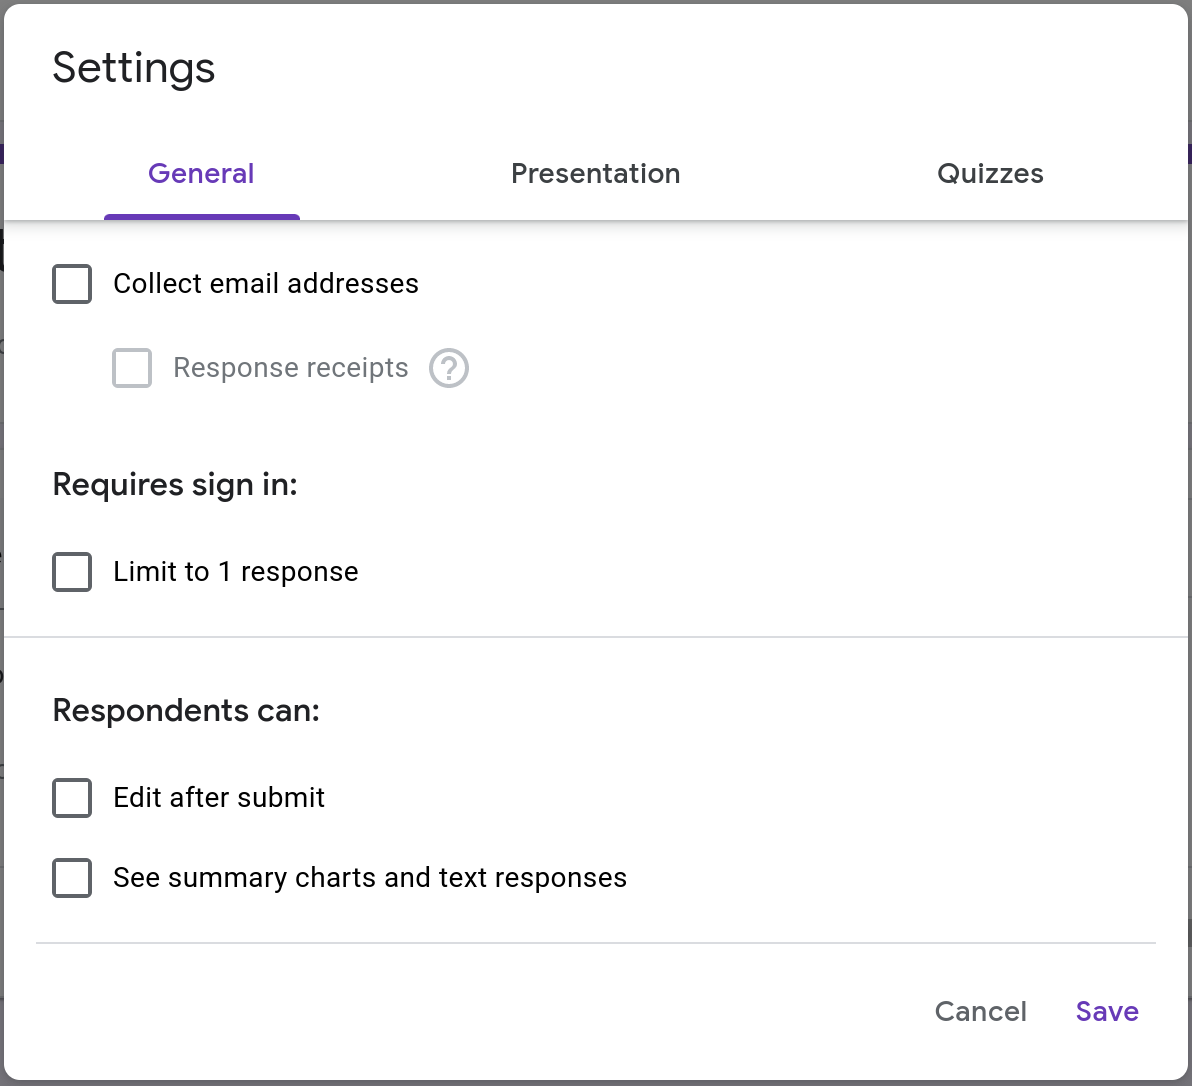 Screenshot of the General tab in the settings page of a Google Form.